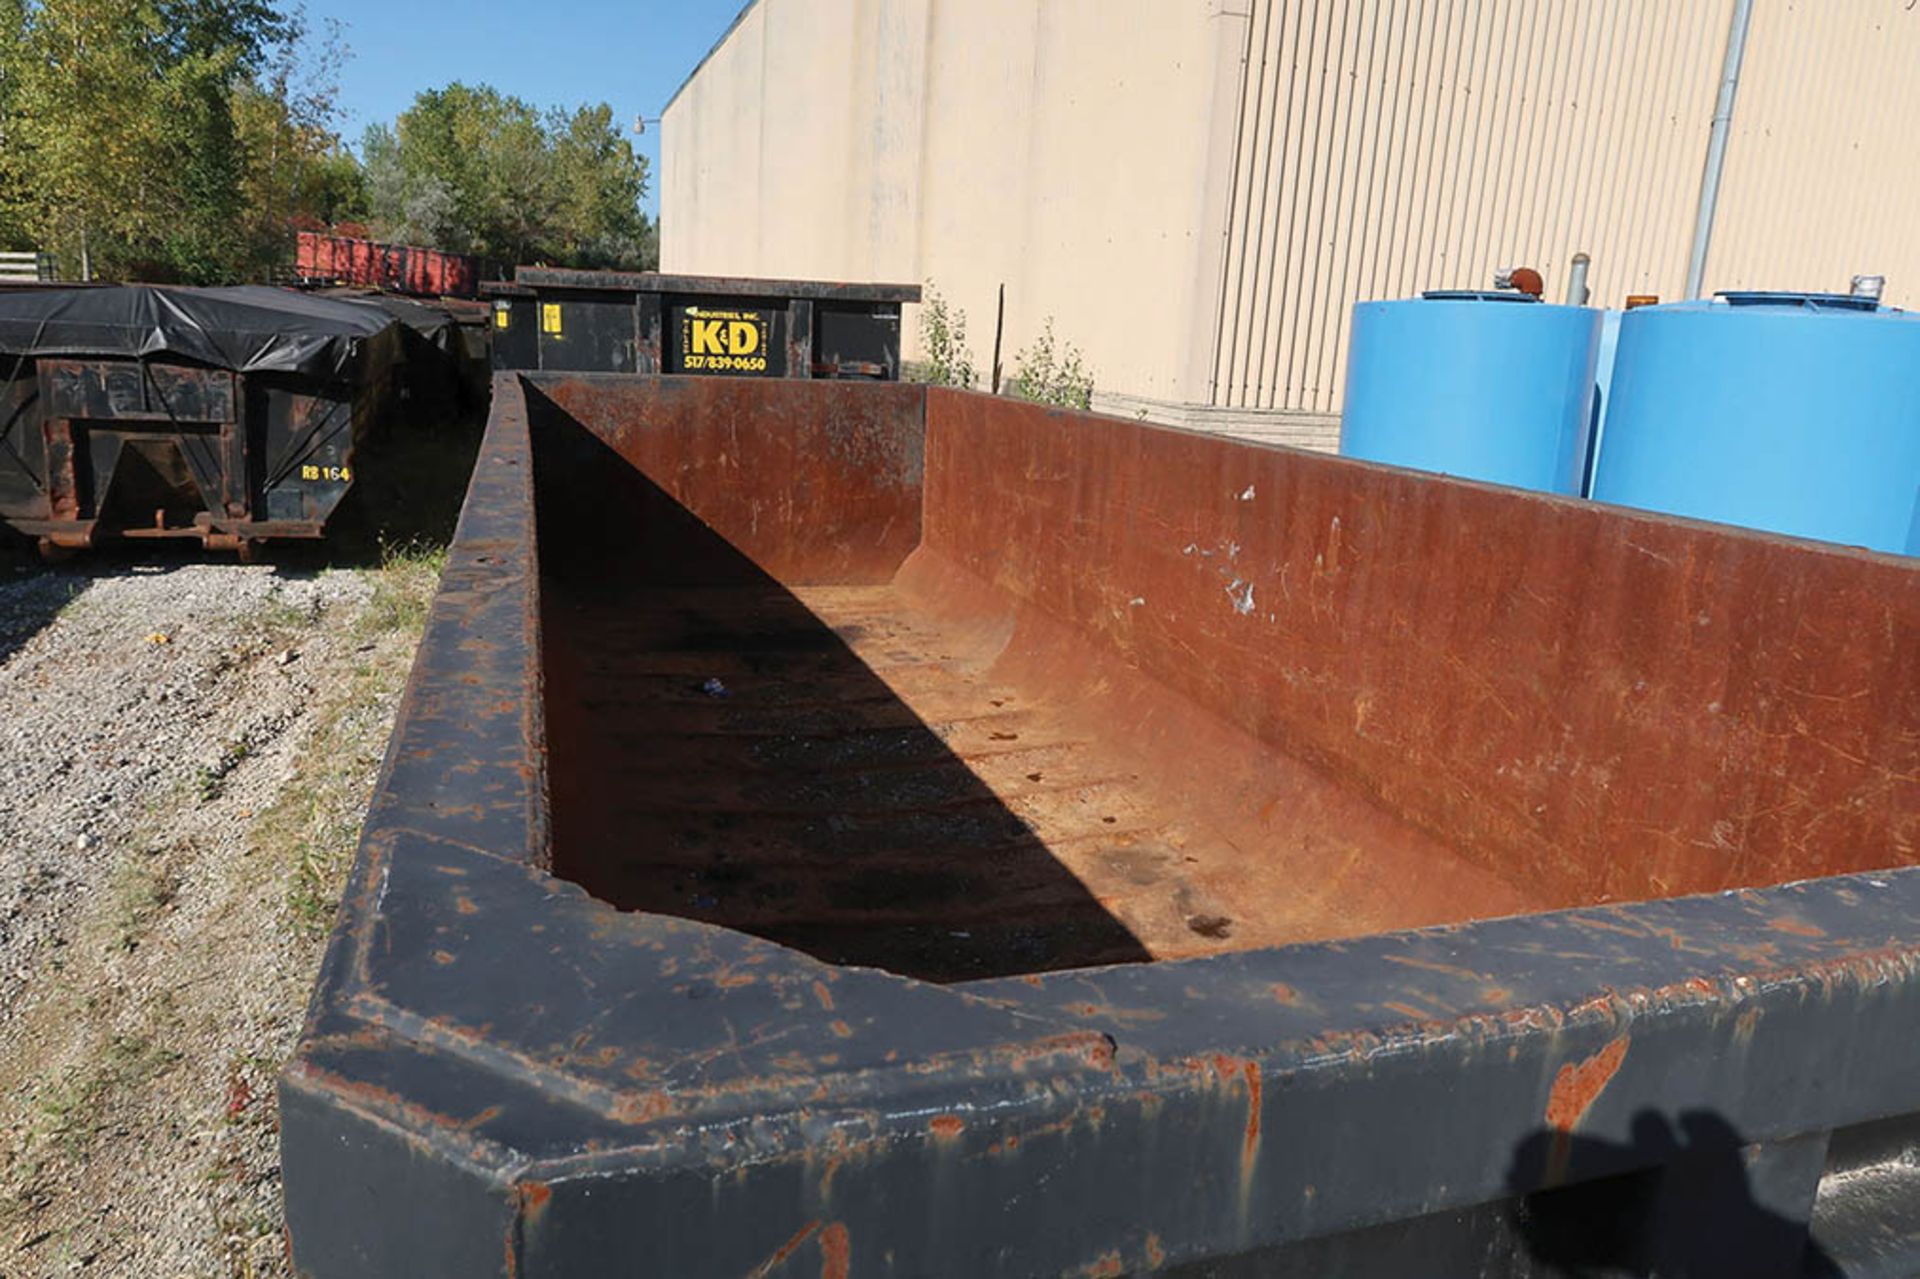 30 CU. YARD ROLL-OFF CONTAINER, RB118 ***LOCATED IN MIDLAND, MICHIGAN** - Image 2 of 2